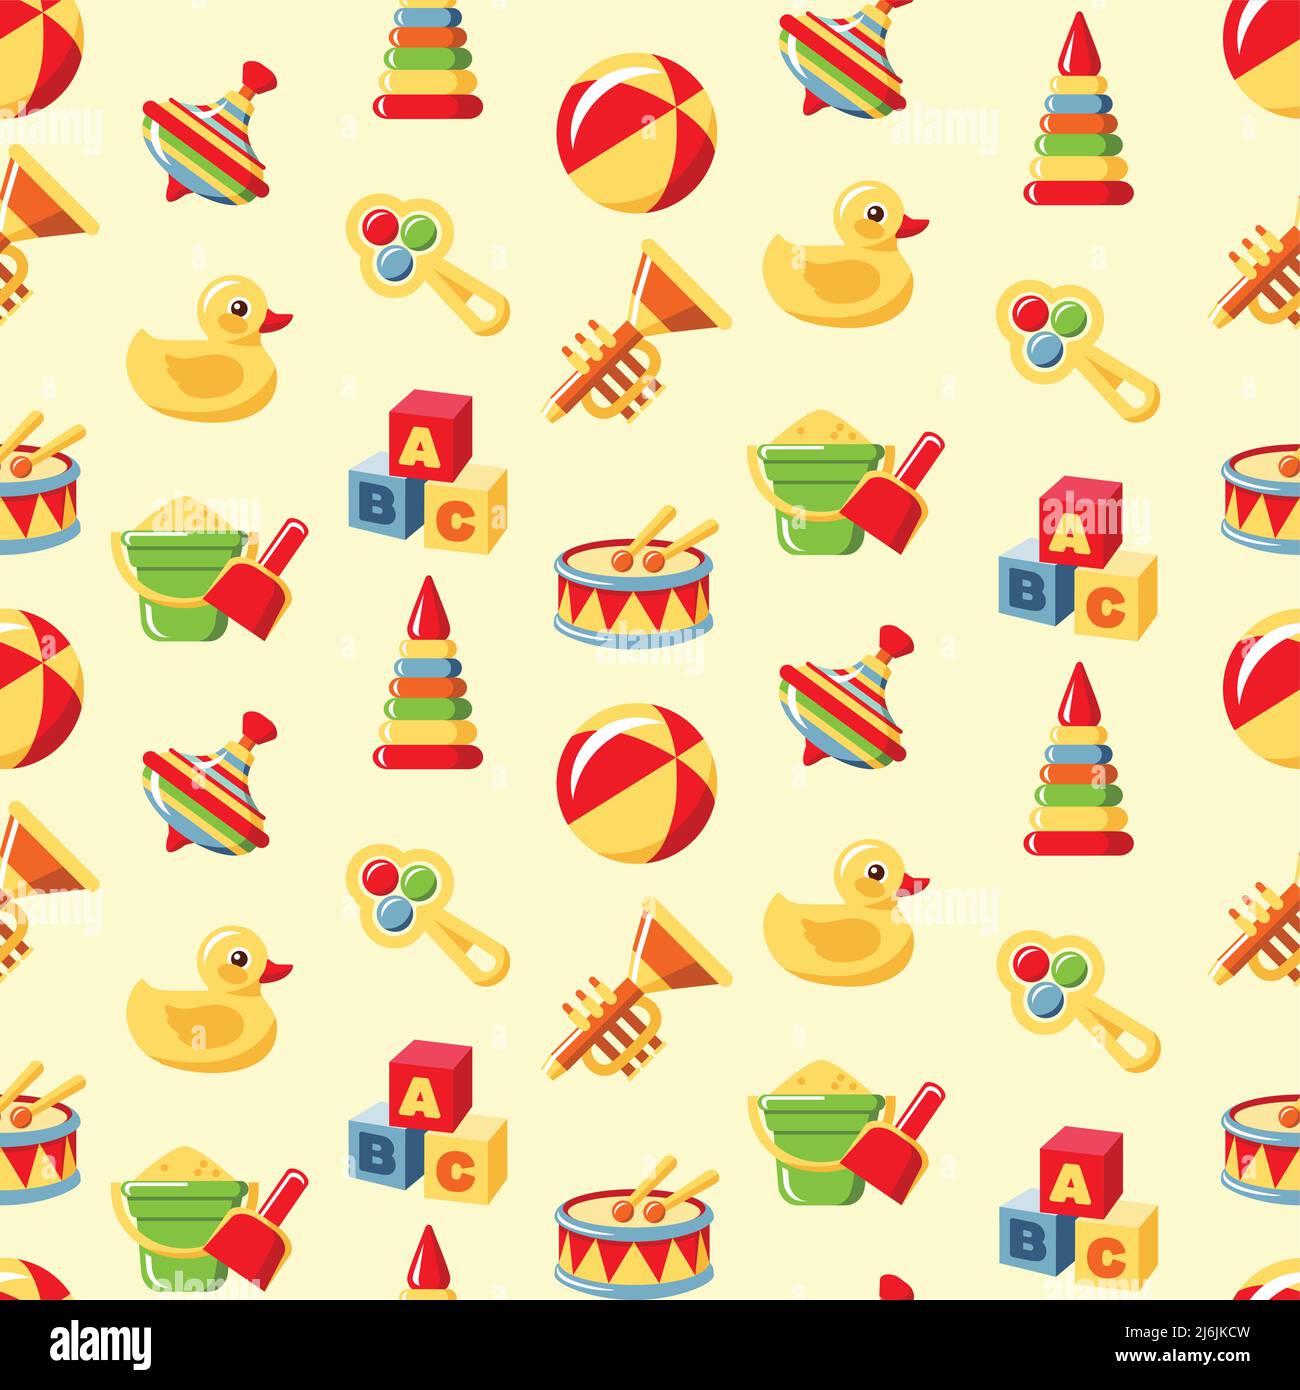 Colorful pattern with different kind of toys Stock Vector